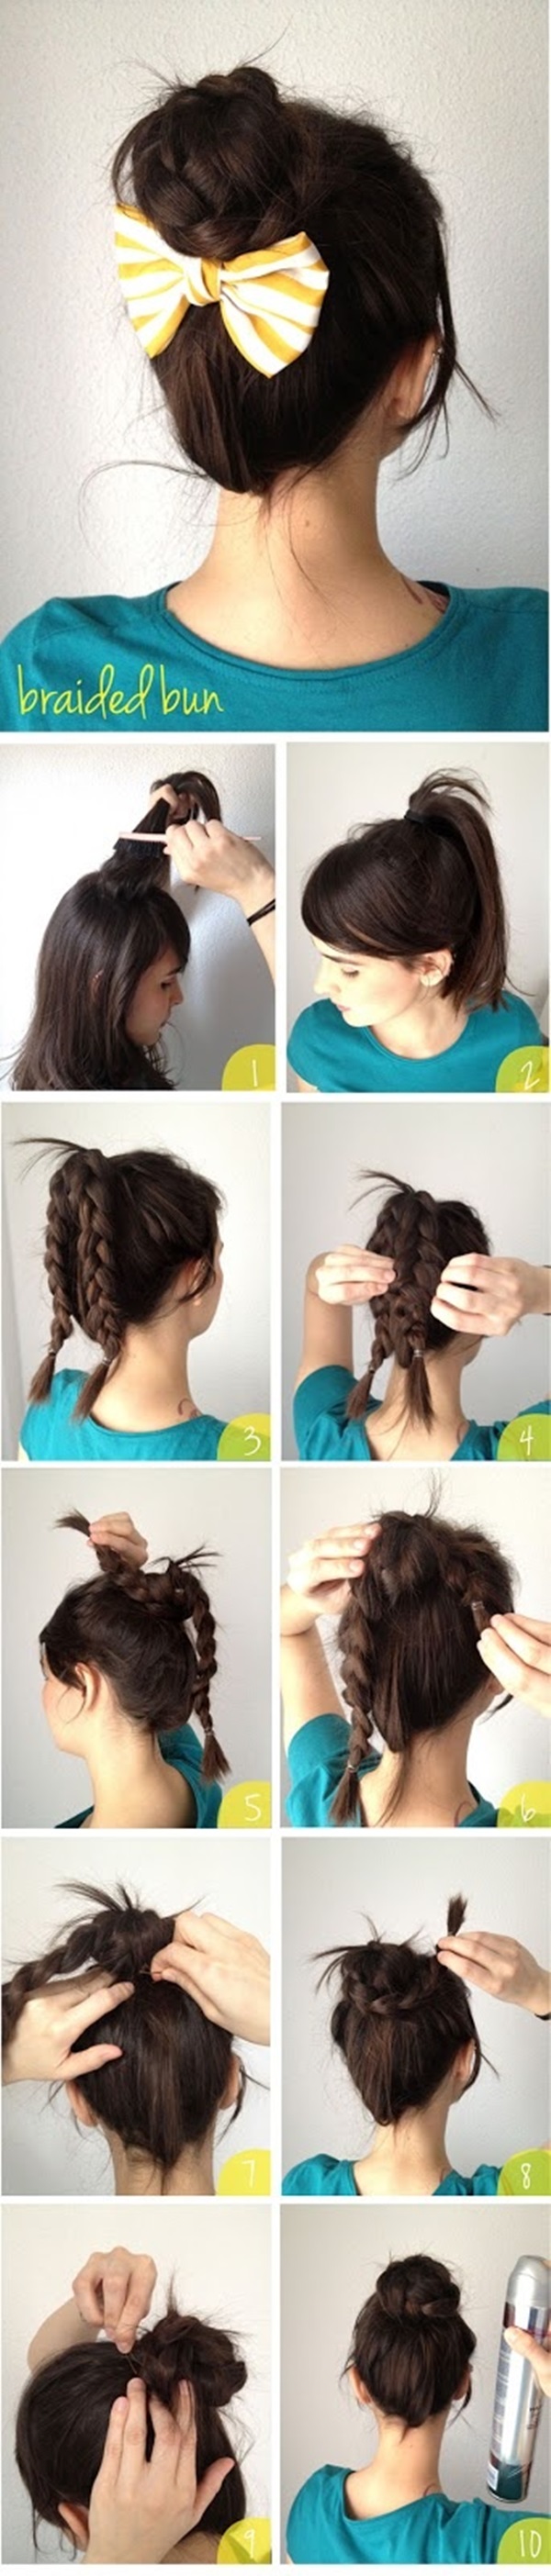 Simple Five Minute Hairstyles (16)